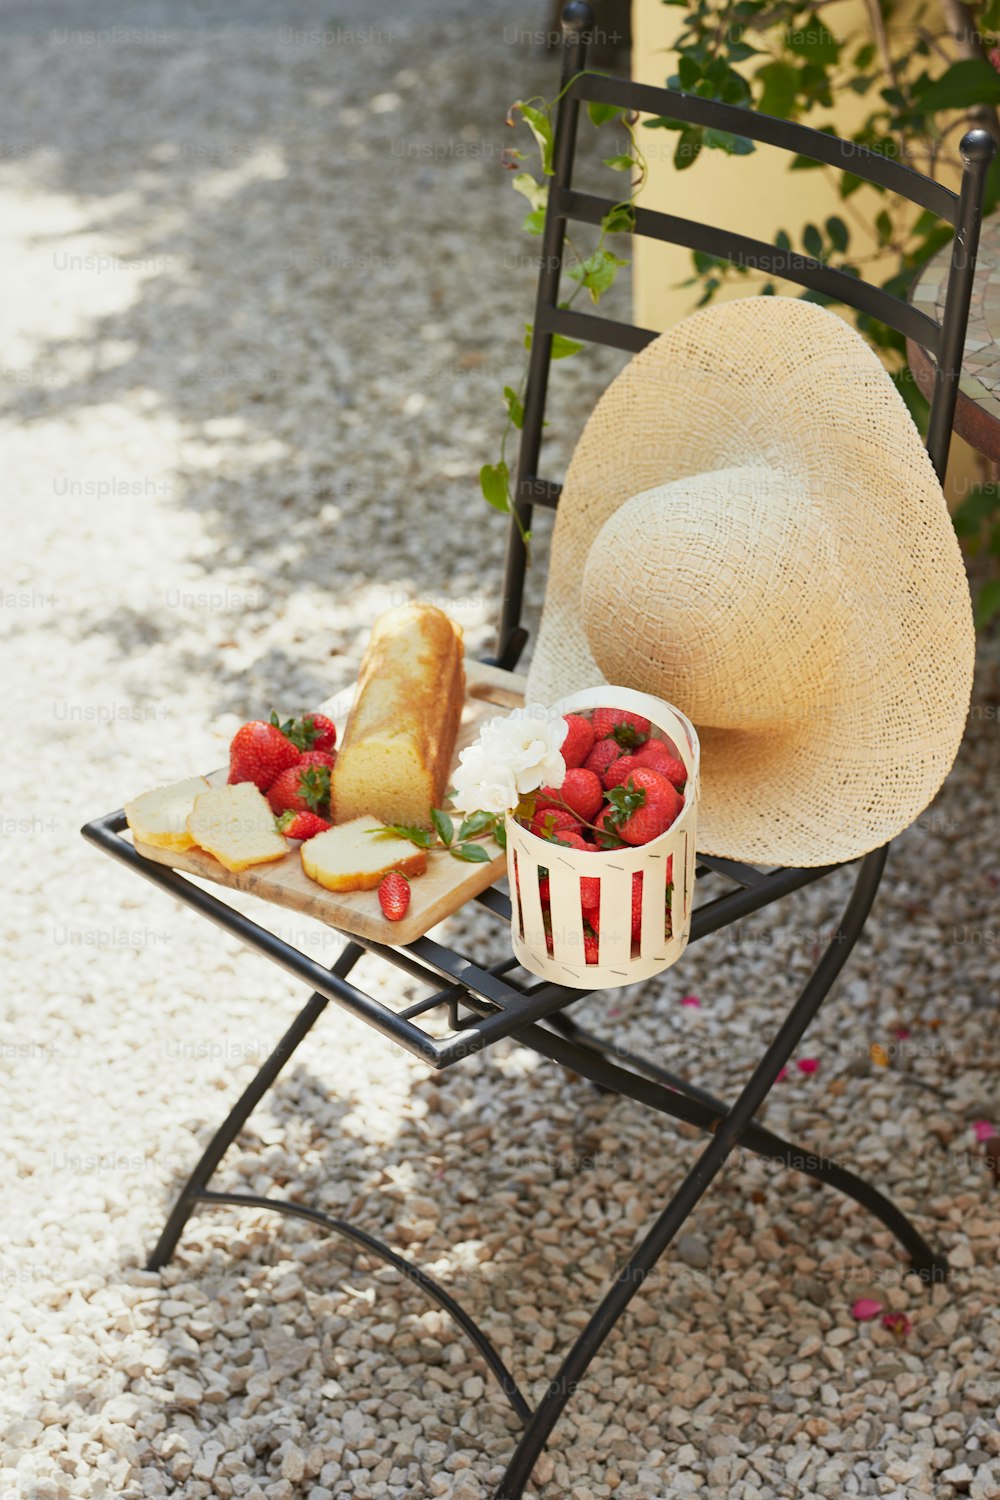 a straw hat sitting on top of a chair next to a plate of strawberries